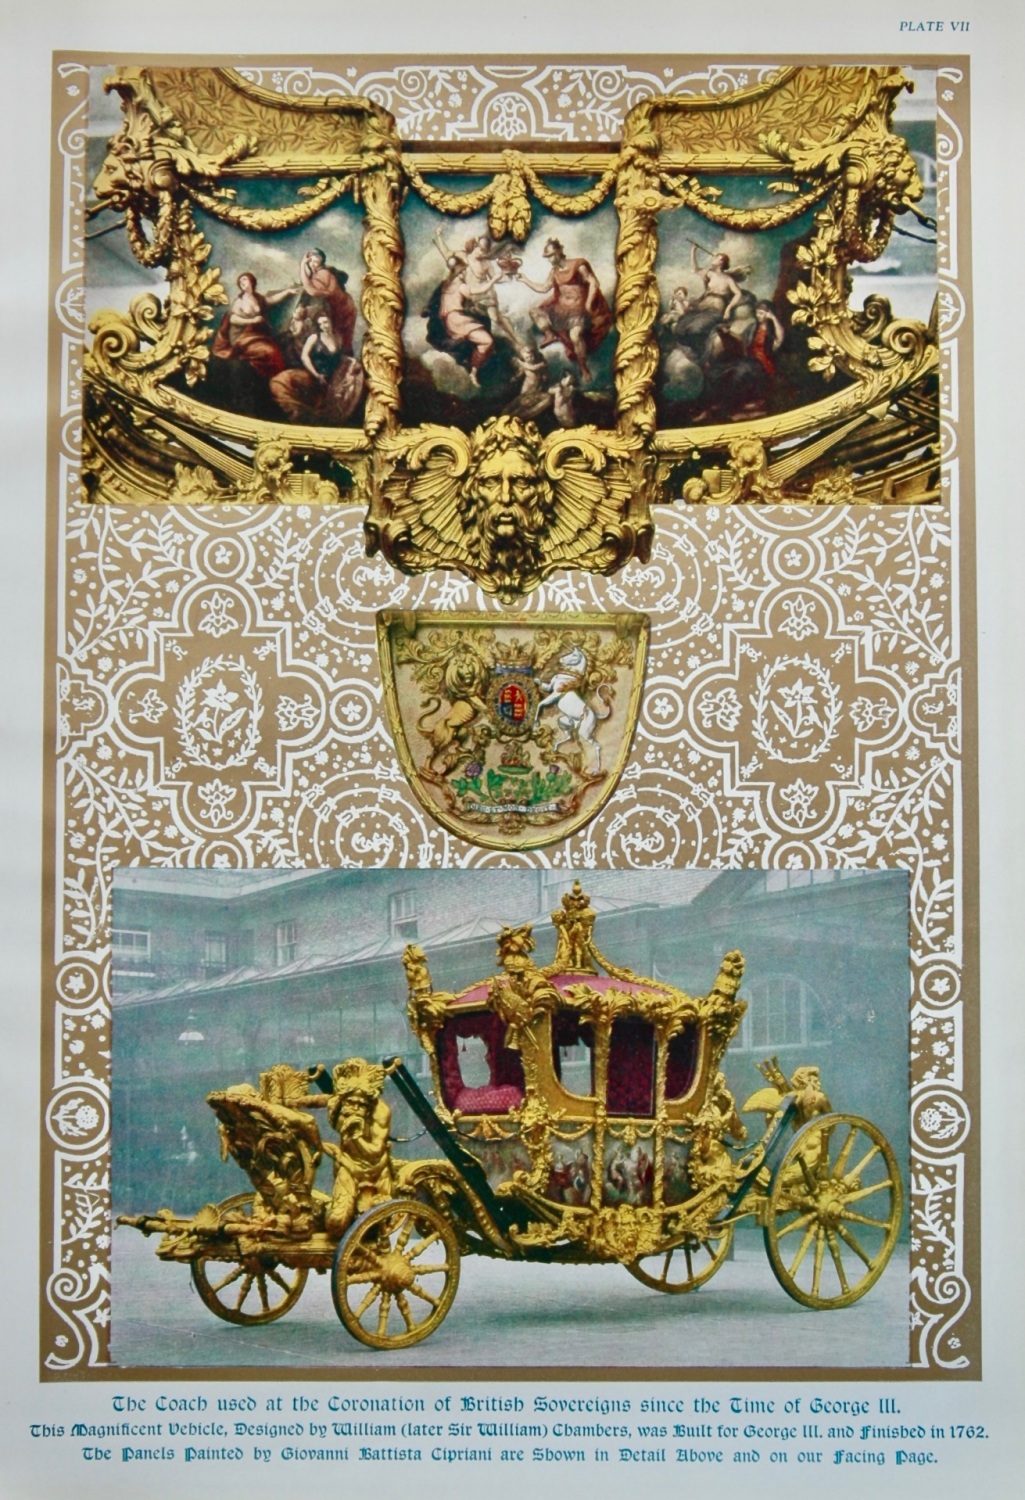 The Coach Used at the Coronation of British Sovereigns since the Time of Ge